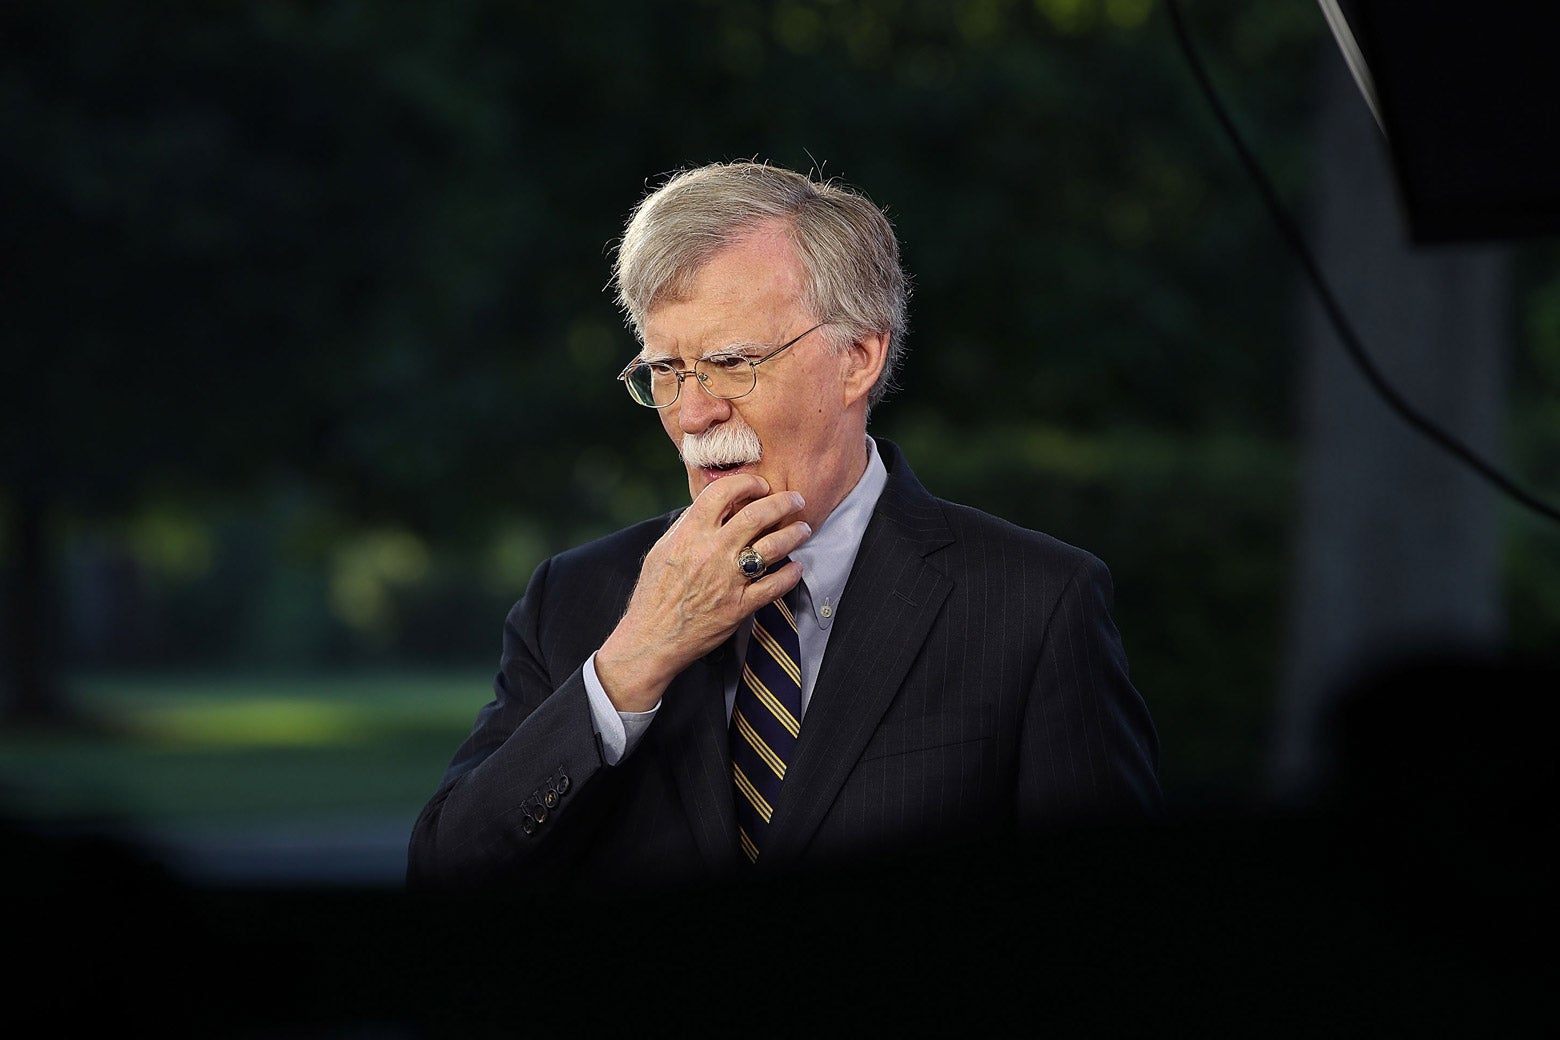 John Bolton strokes his chin while standing outside the White House.